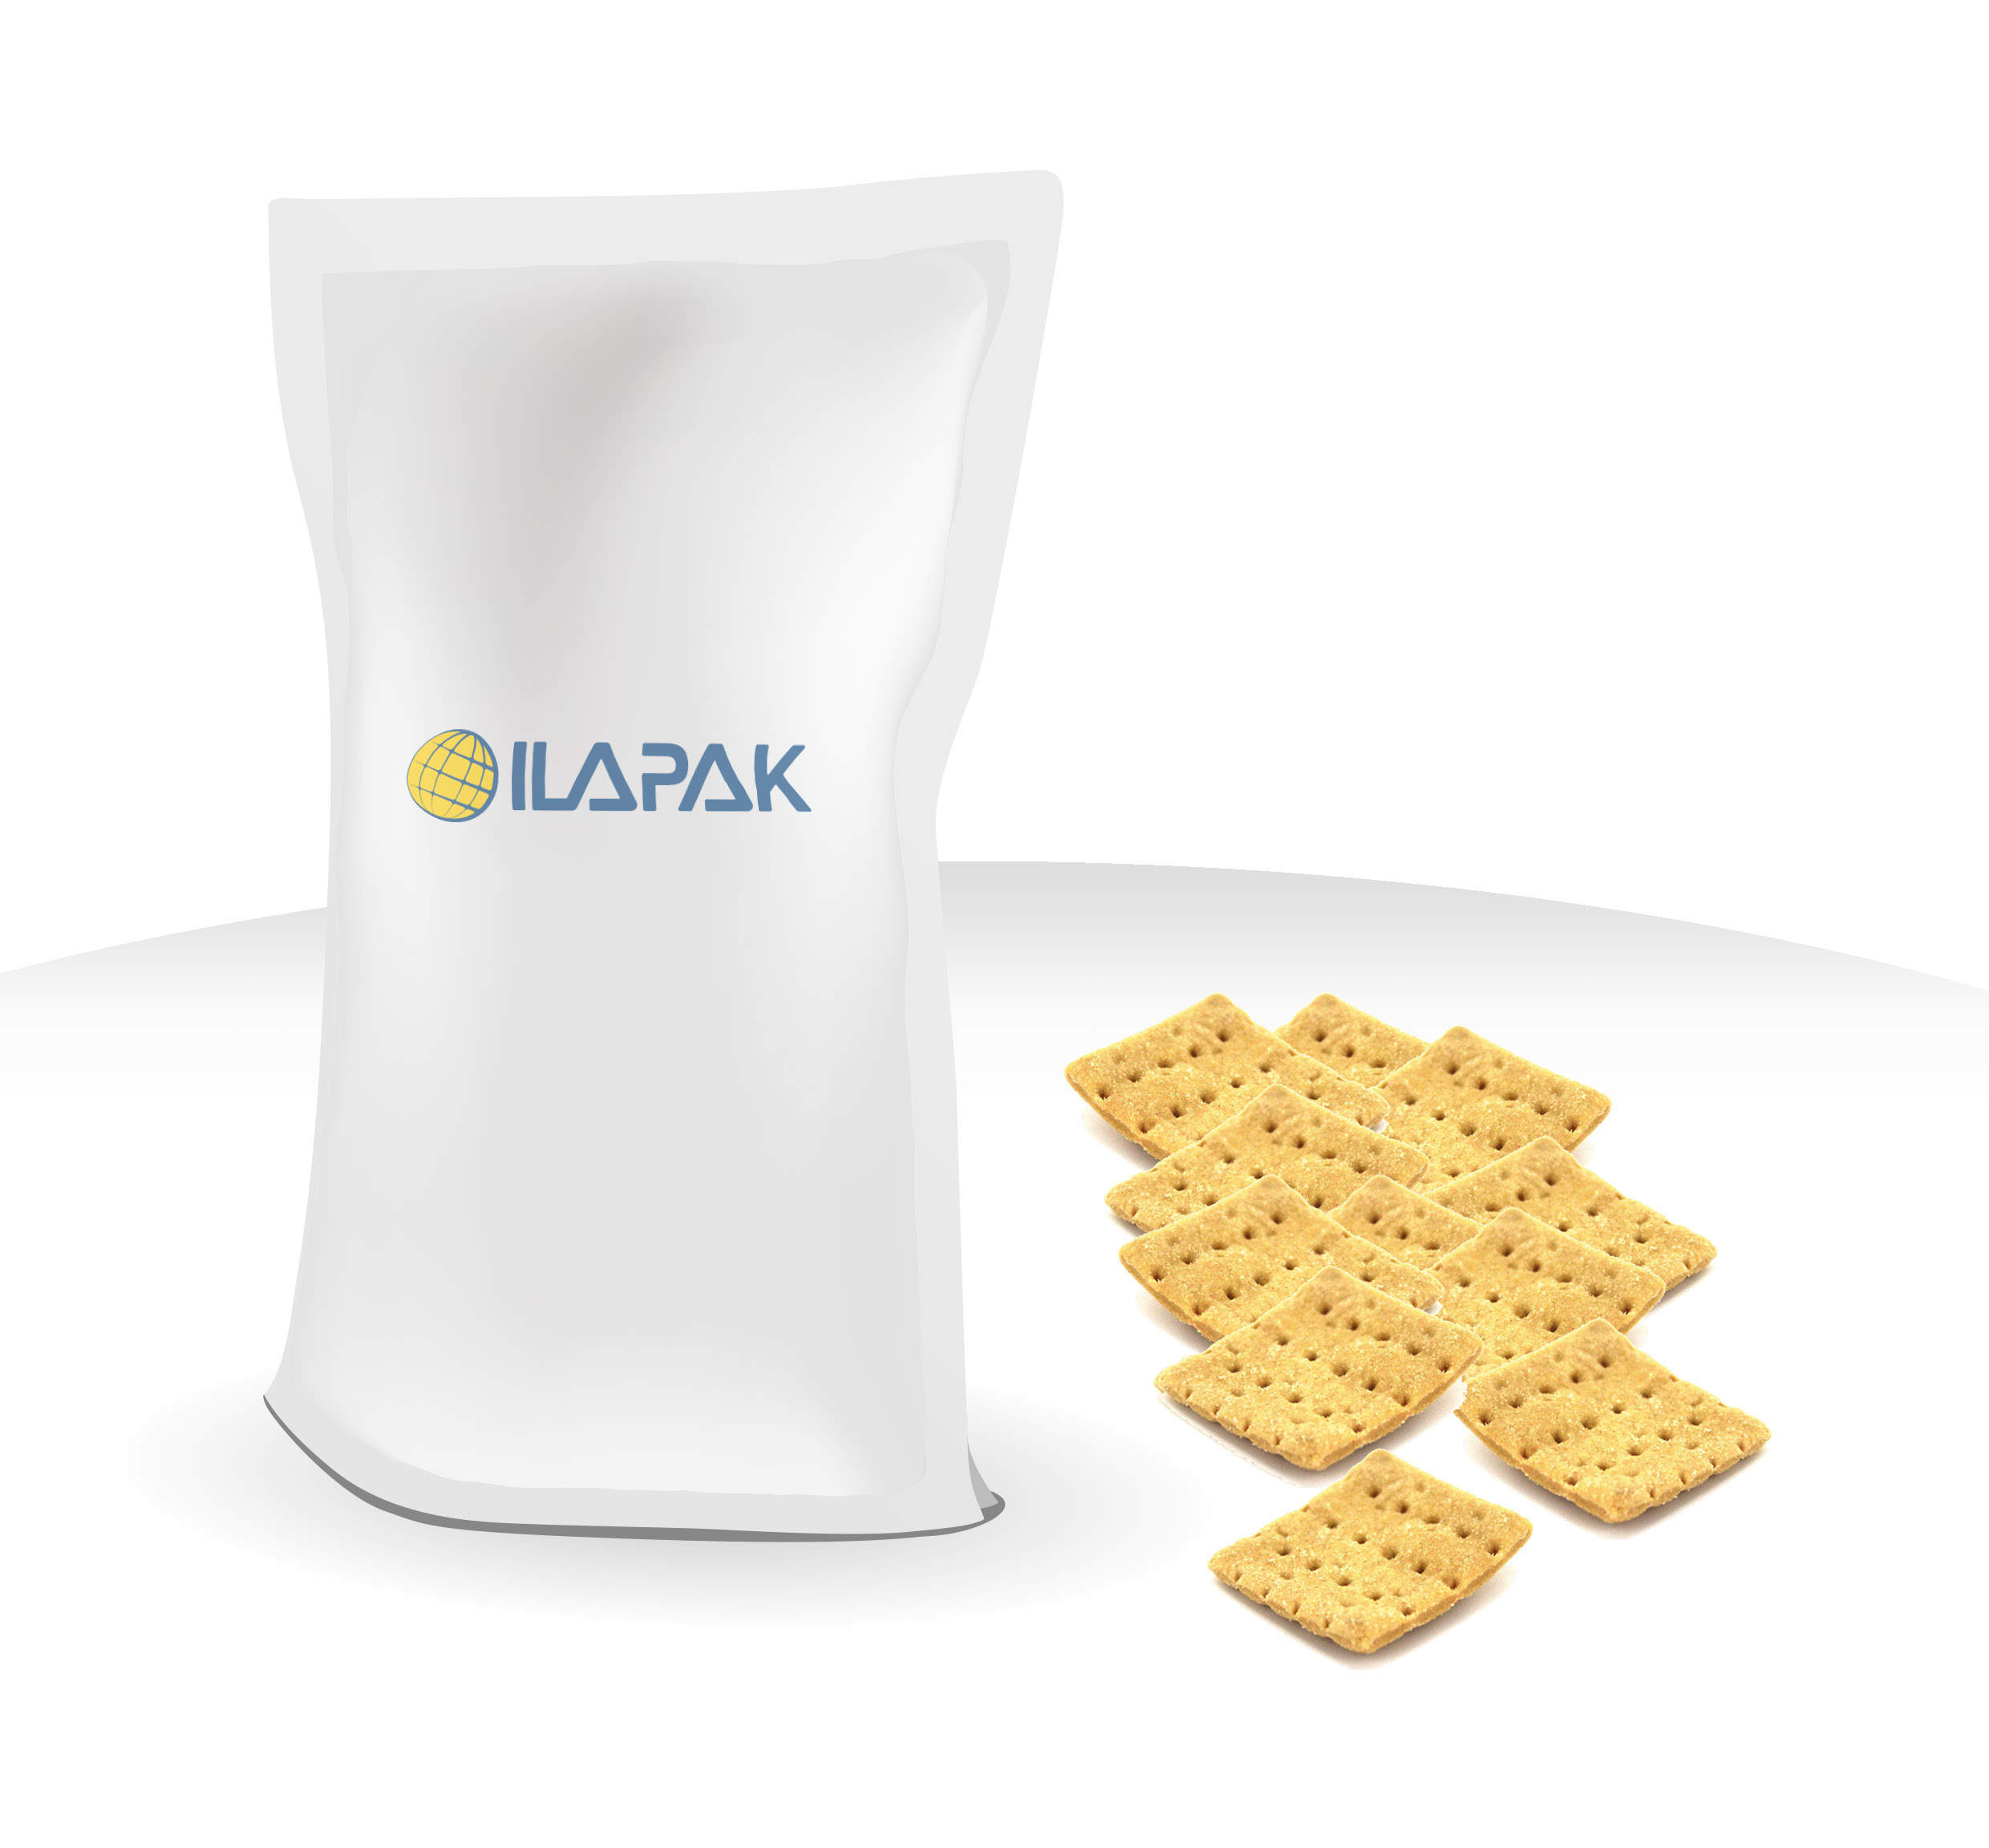 Ilapak unveils Vegatronic 2000 OF stand-up pouch with seal integrity